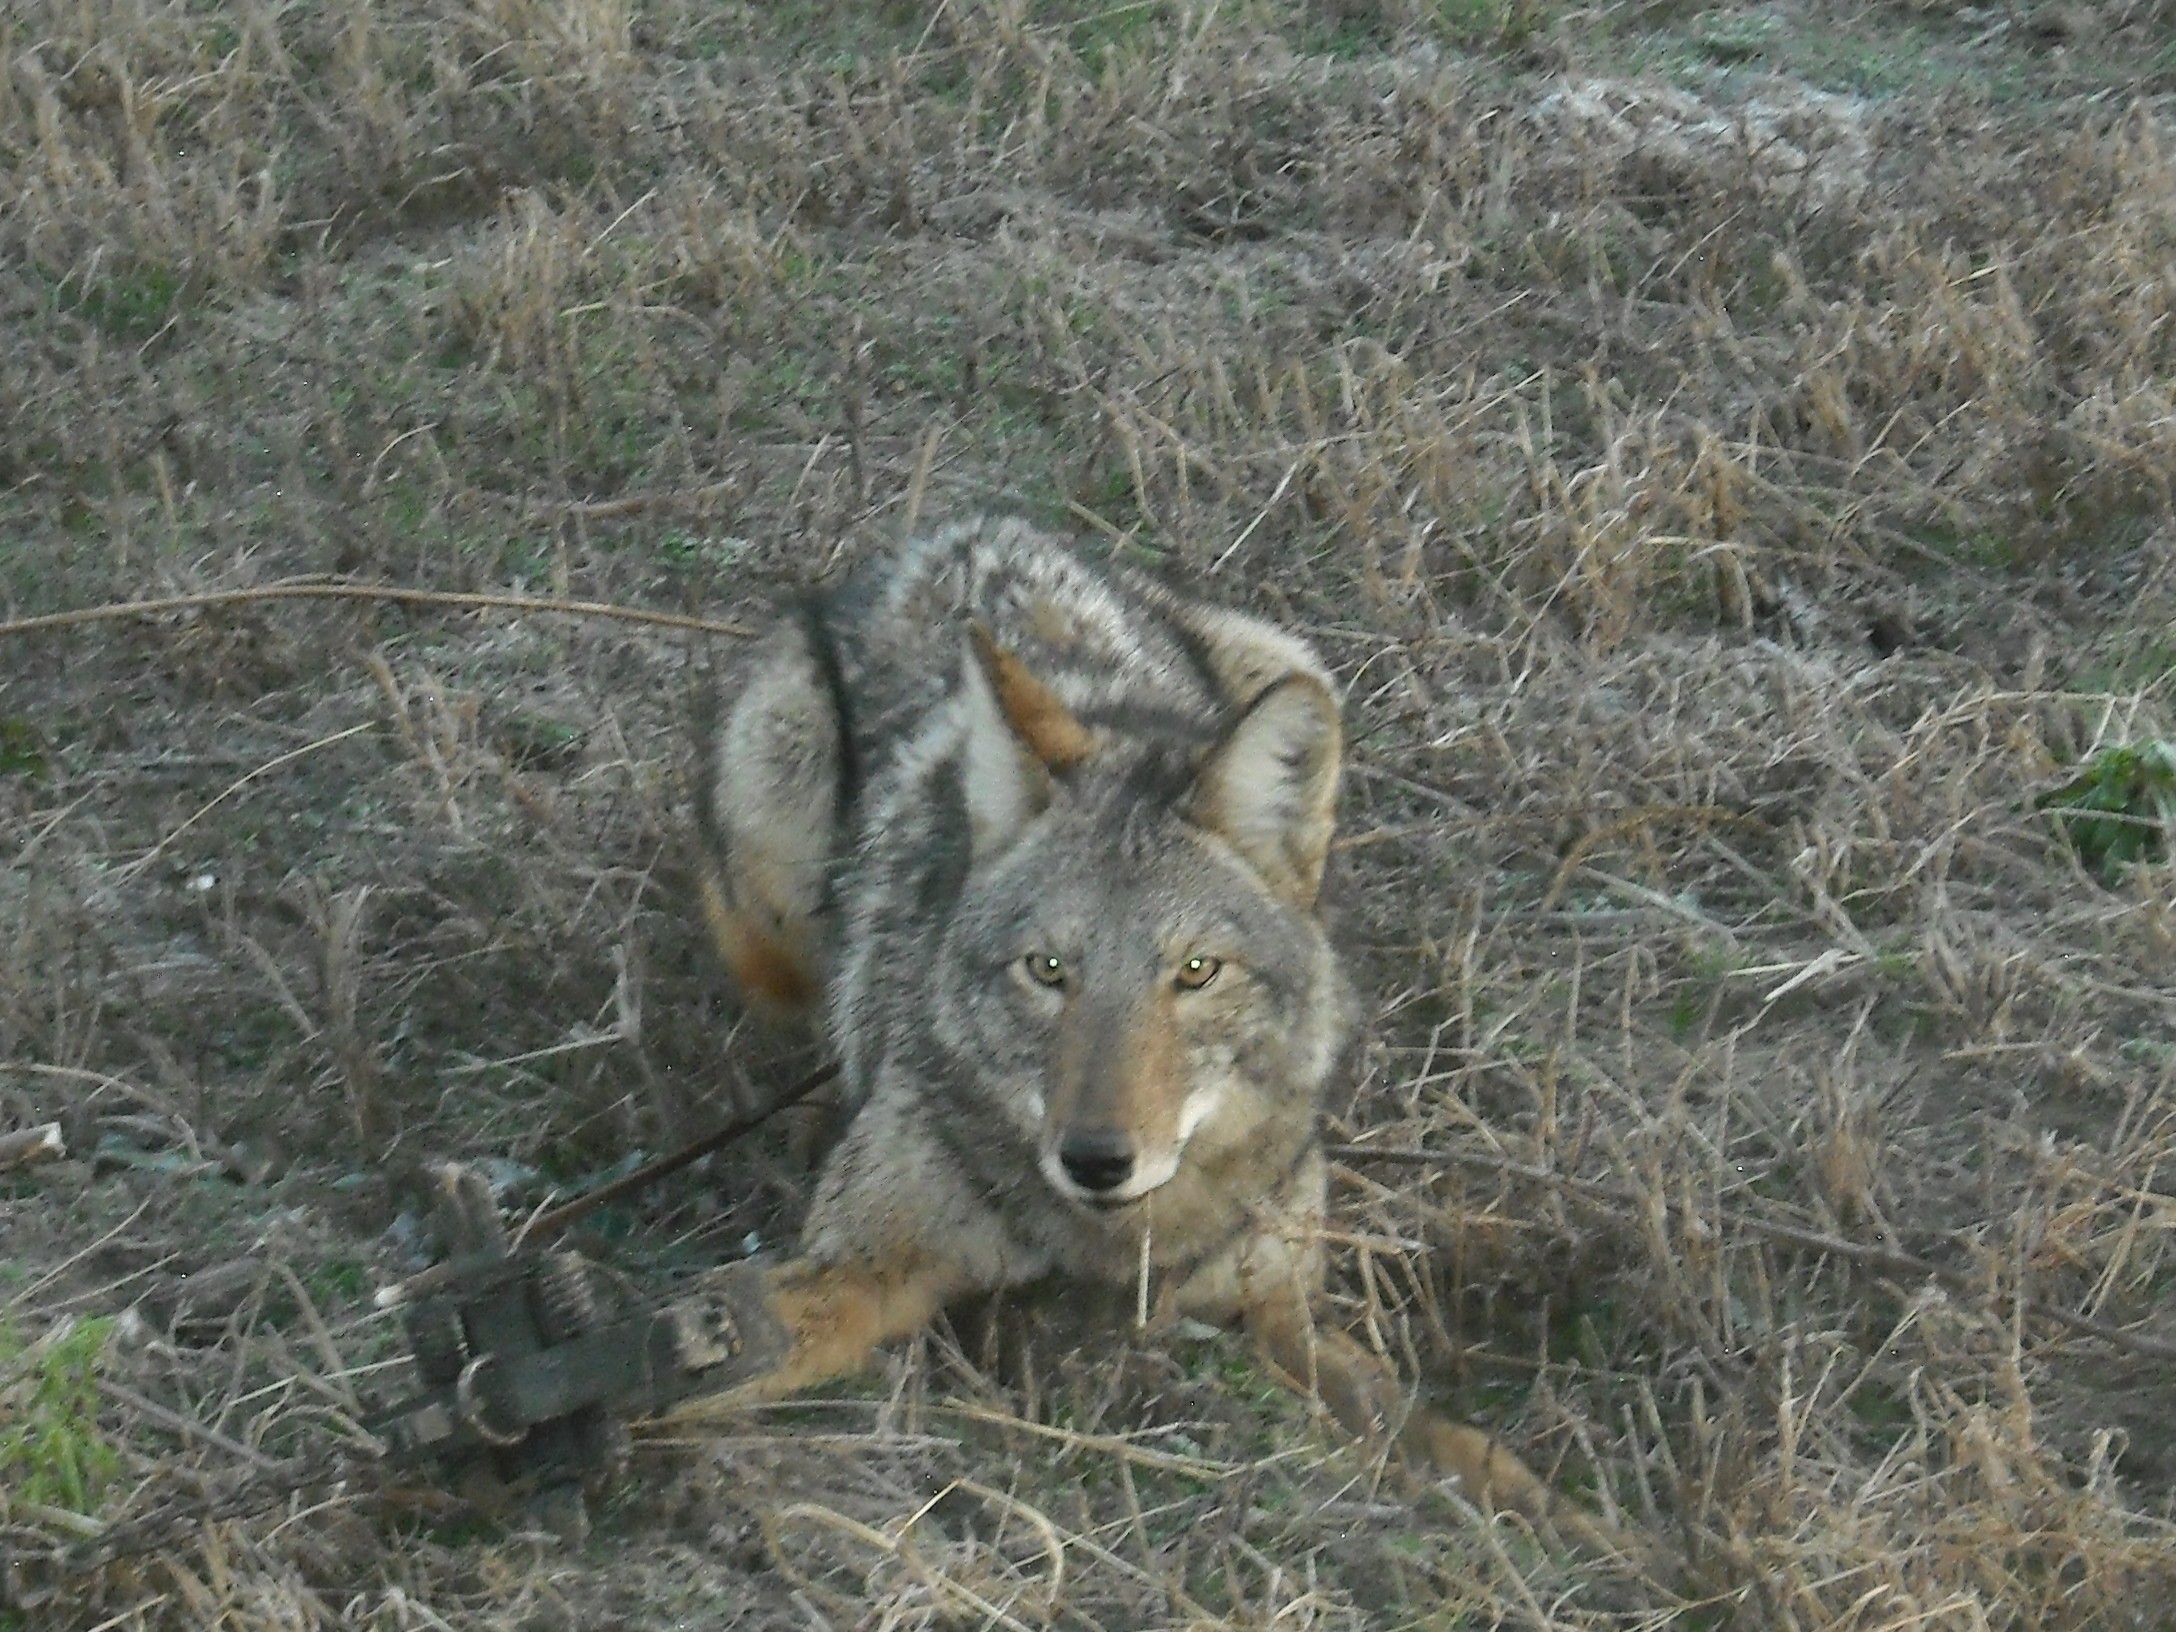 Trapping Radio 162, Trapping coyotes on small property, trapping business idea and why.